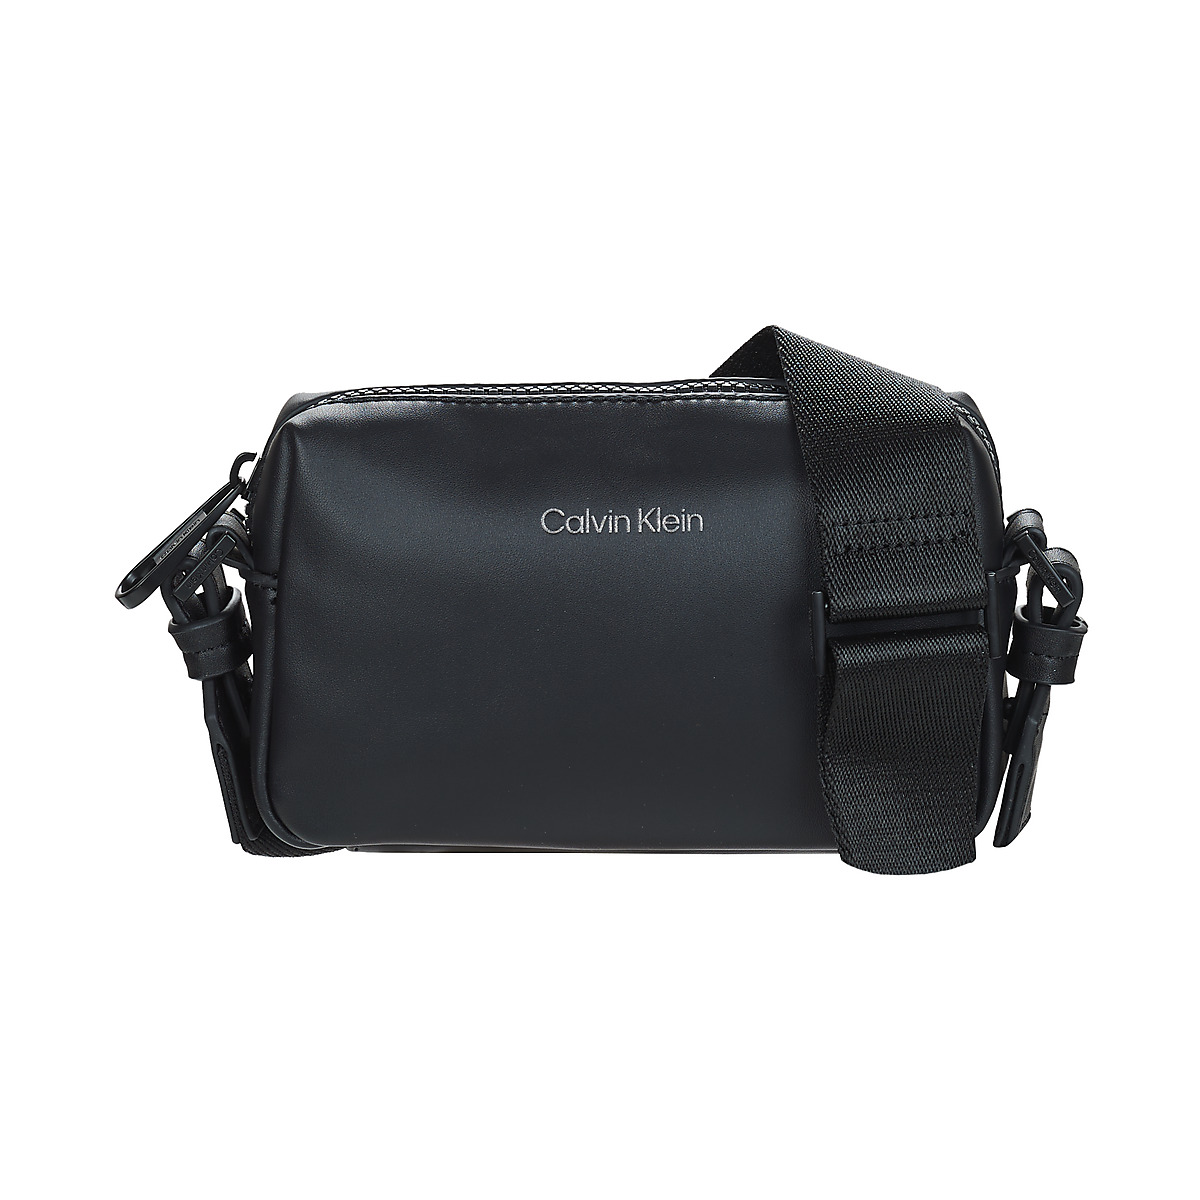 Calvin Klein Jeans CK MUST CAMERA BAG S SMO Black - Free delivery | Spartoo  NET ! - Bags Pouches / Clutches Men